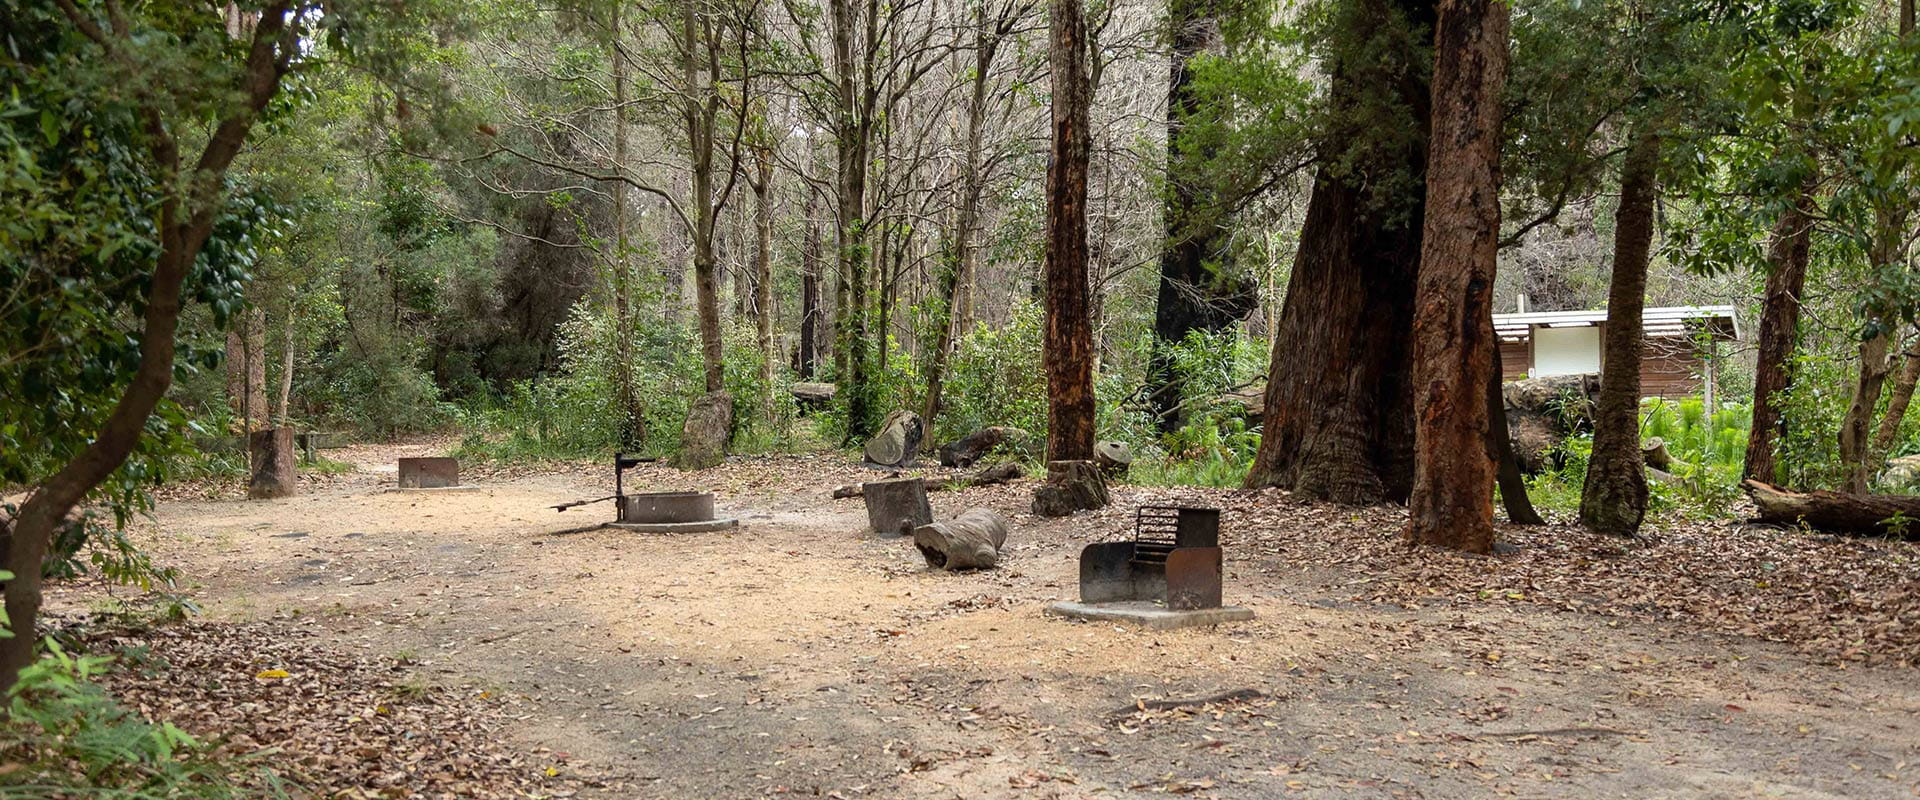 A campground setting featuring steel BBQ hotplates next to fireplaces, lined by brown tree trunks.